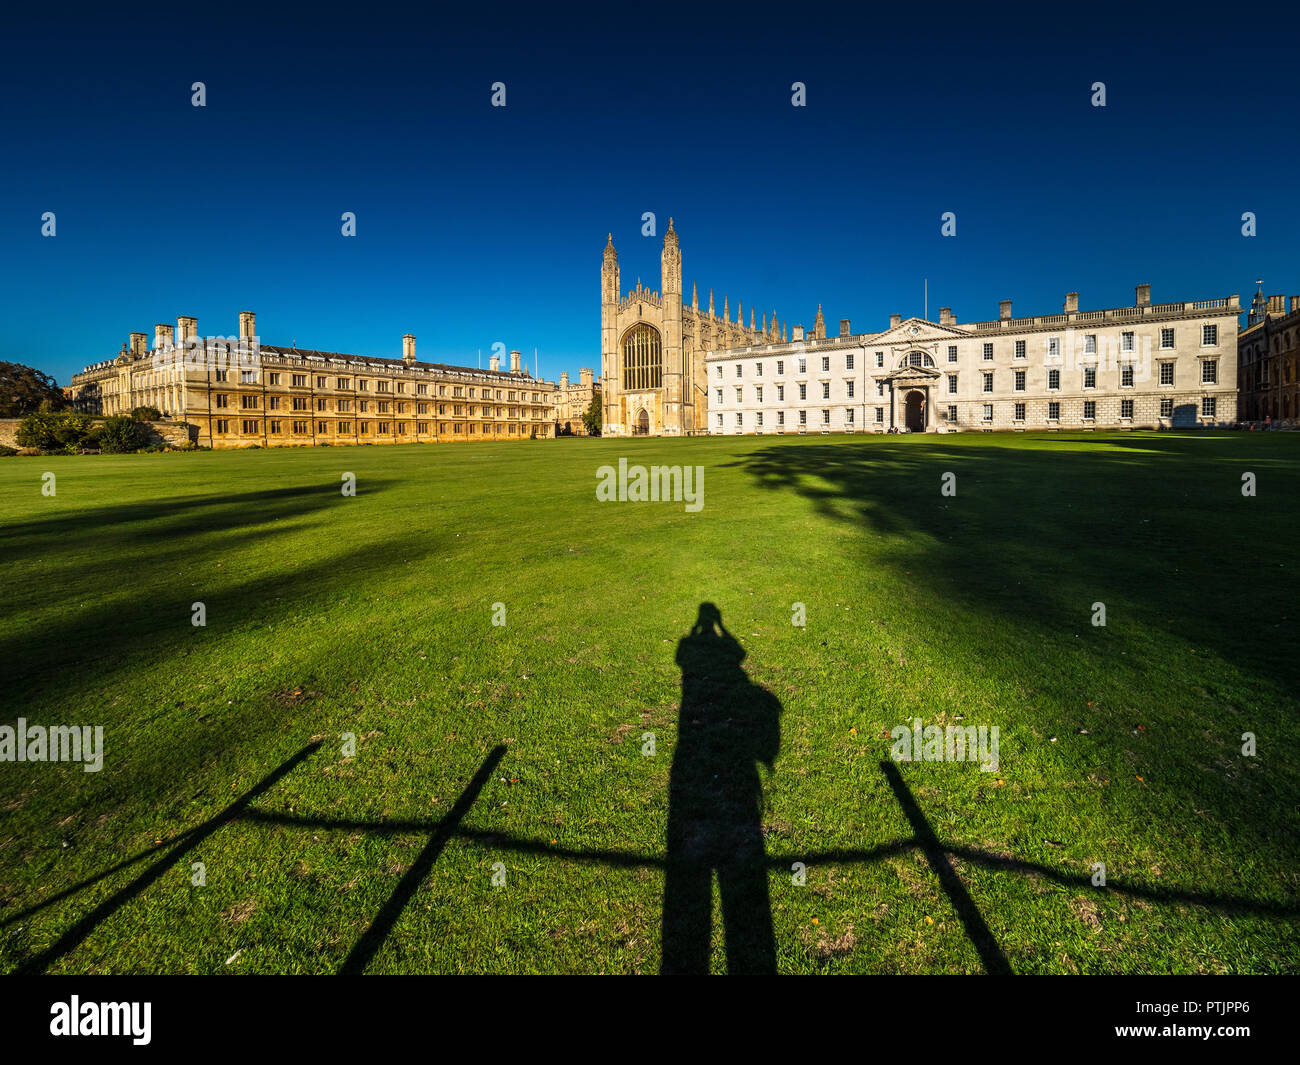 Cambridge Tourism - a tourist takes a photo of the famous Kings College Chapel in the grounds of Kings College, part of the University of Cambridge Stock Photo